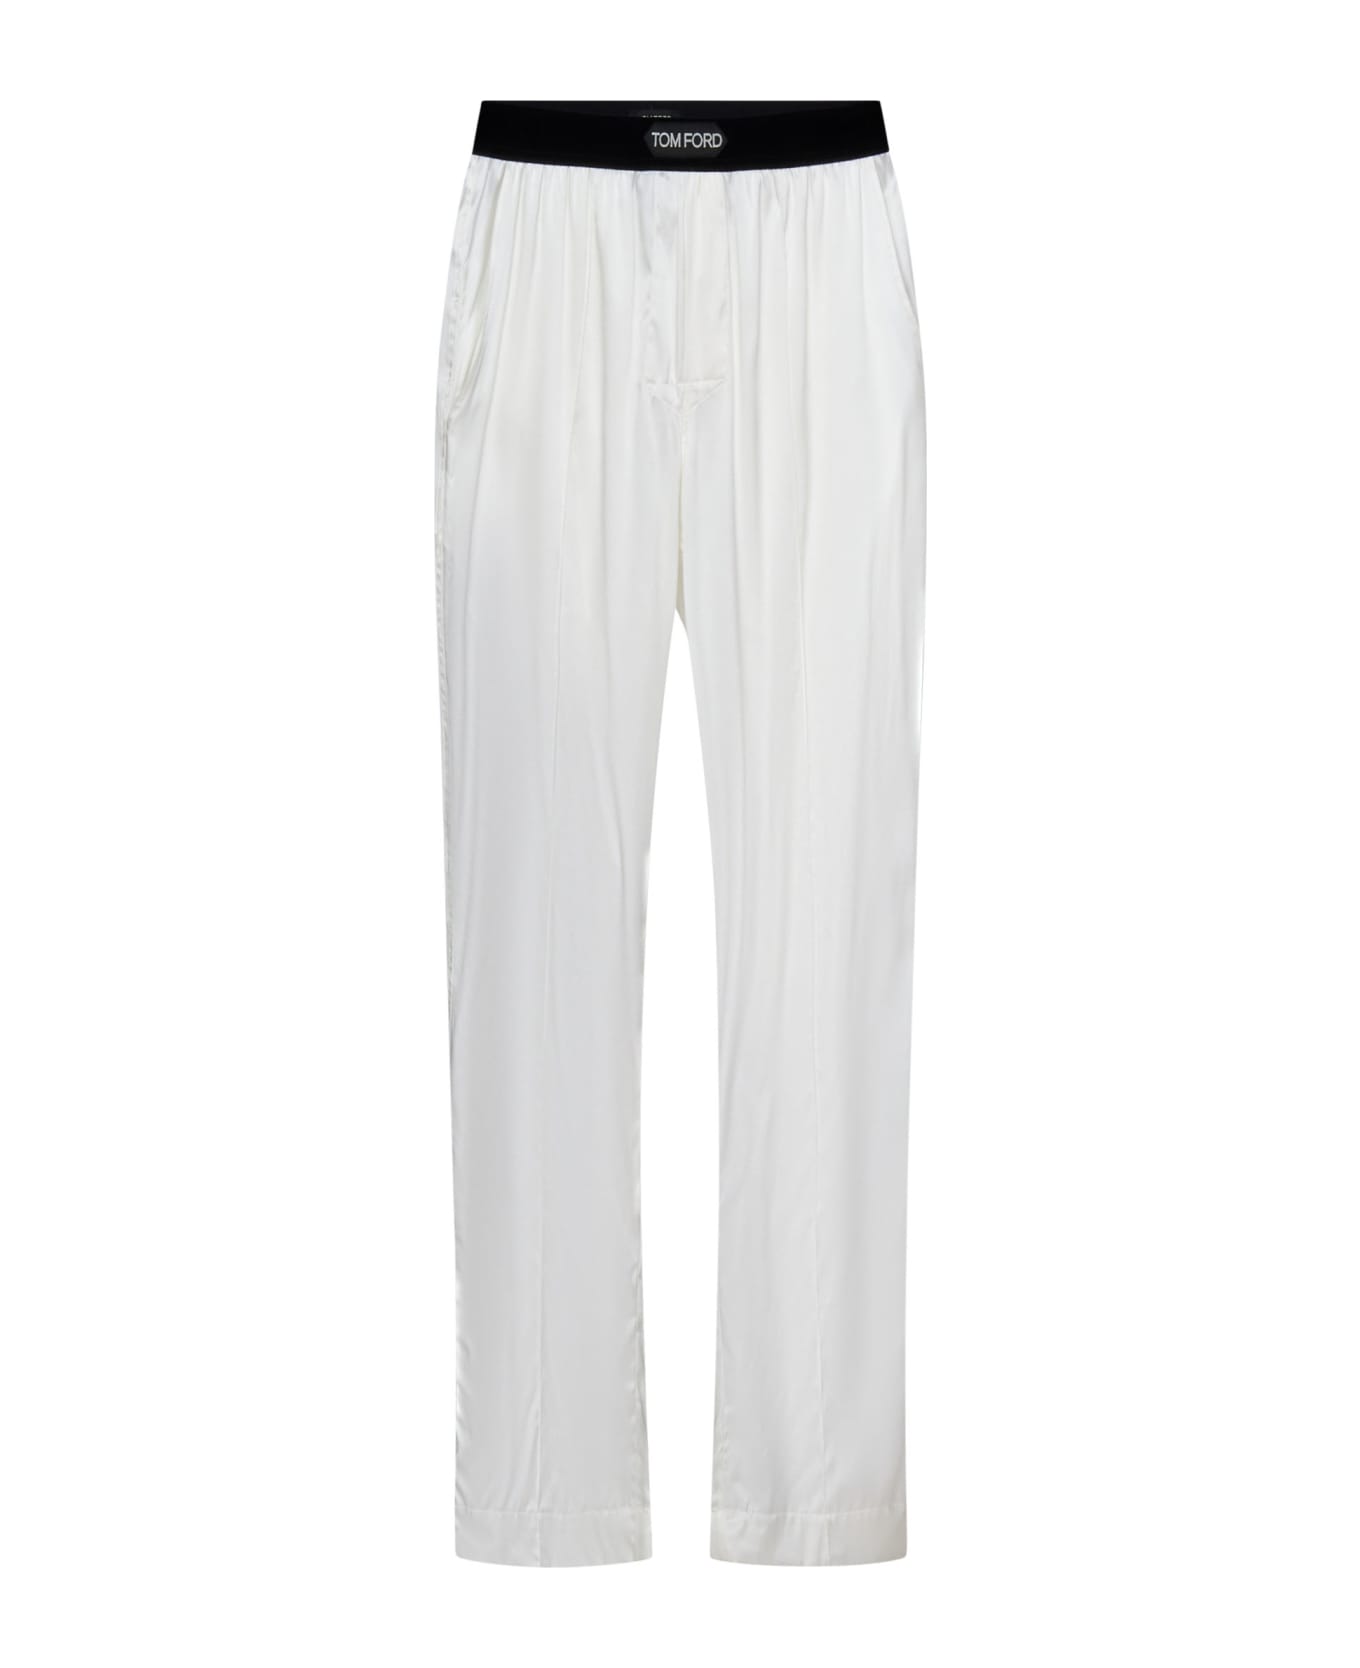 Tom Ford Trousers - Ivory ボトムス